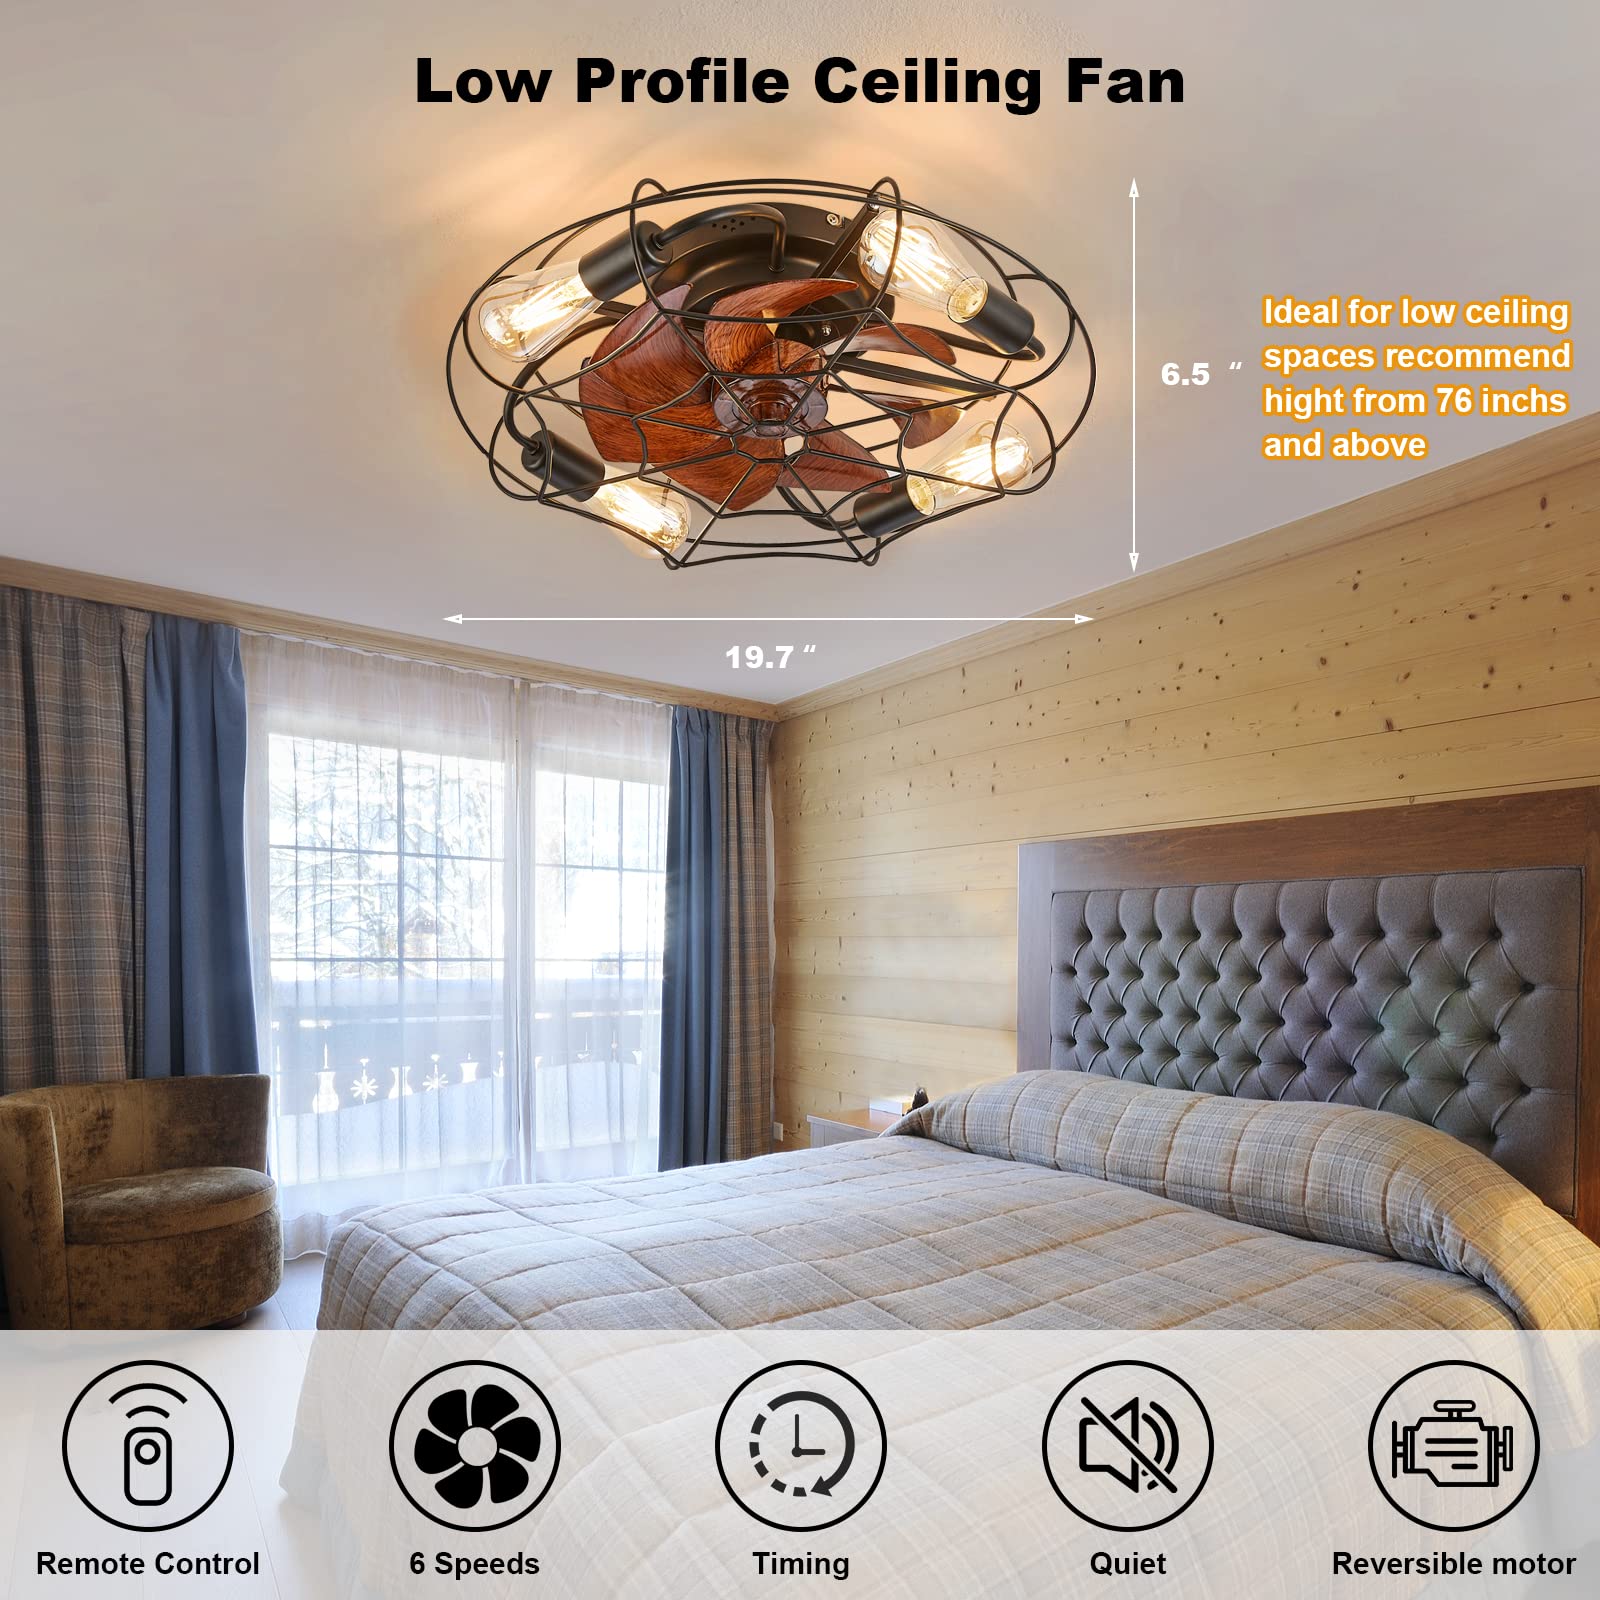 NERONDA 19.7" Caged Ceiling Fan with Light and Remote,Flush Mount Bladeless Ceiling Fan, Low Profile Caged Ceiling Fan,Small Industrial Black Ceiling Light Fixture,Reversible